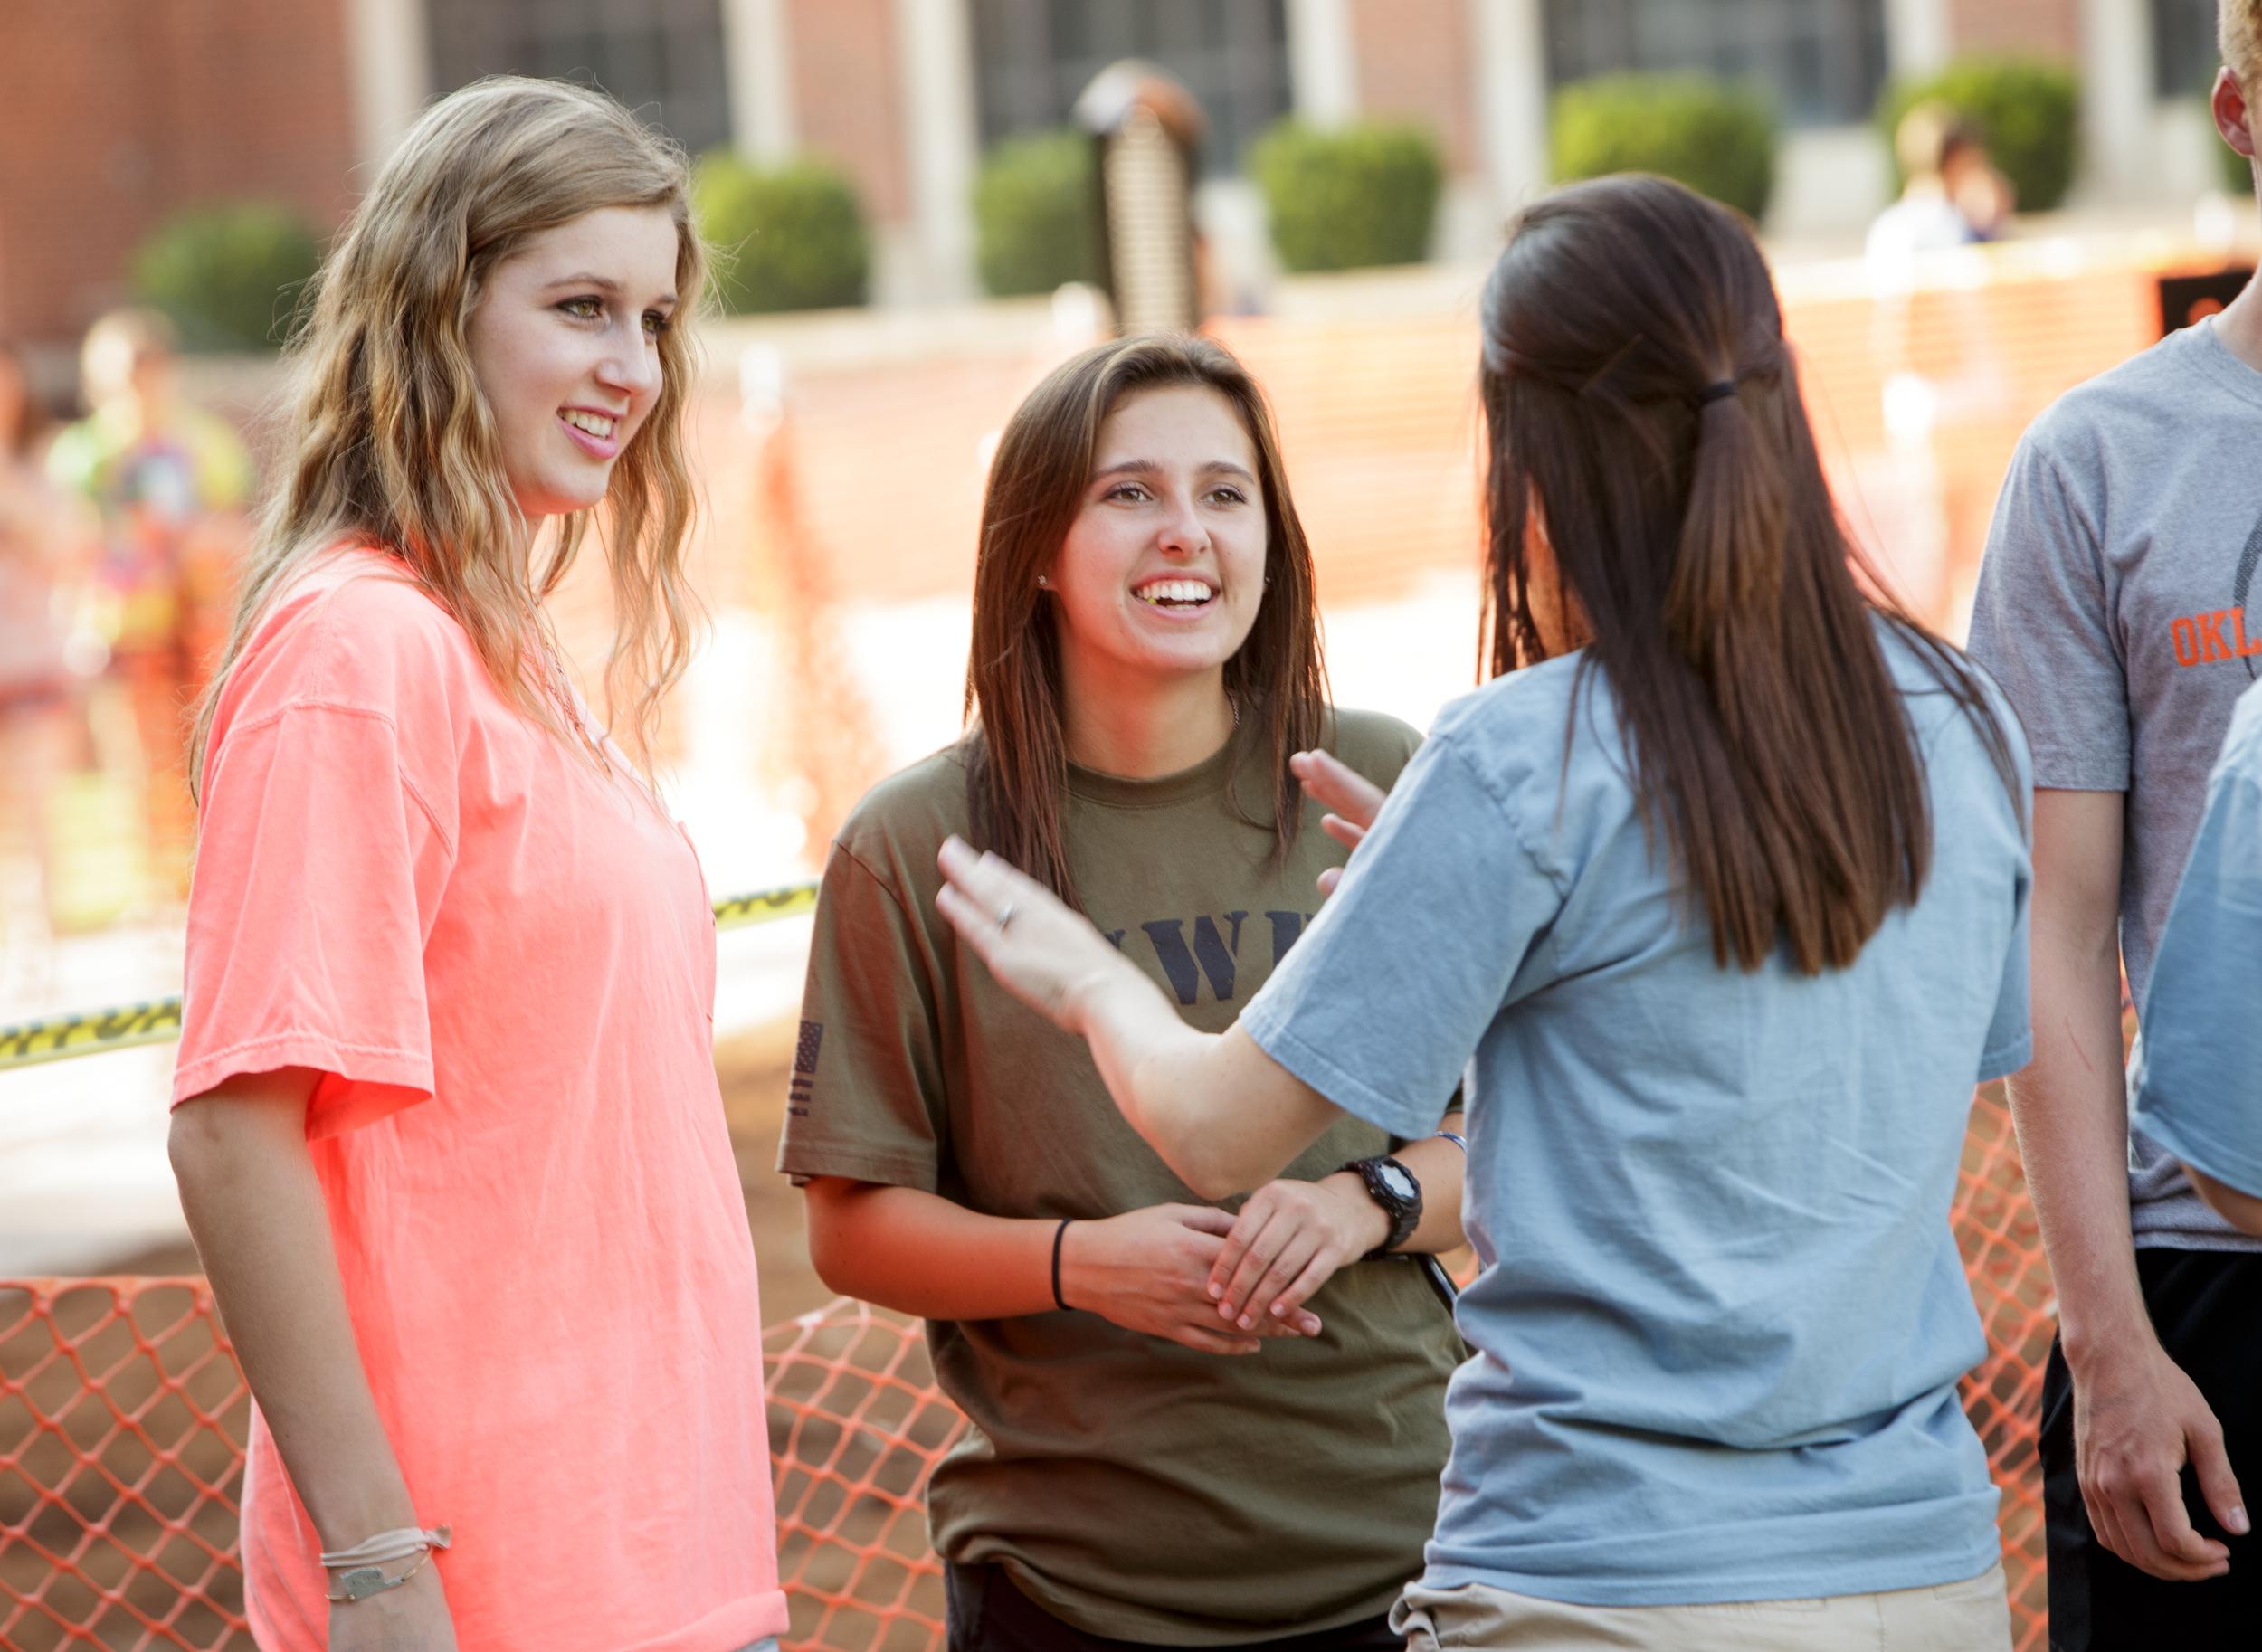 A young woman with long brown hair speaks to two other women in an outdoor campus setting